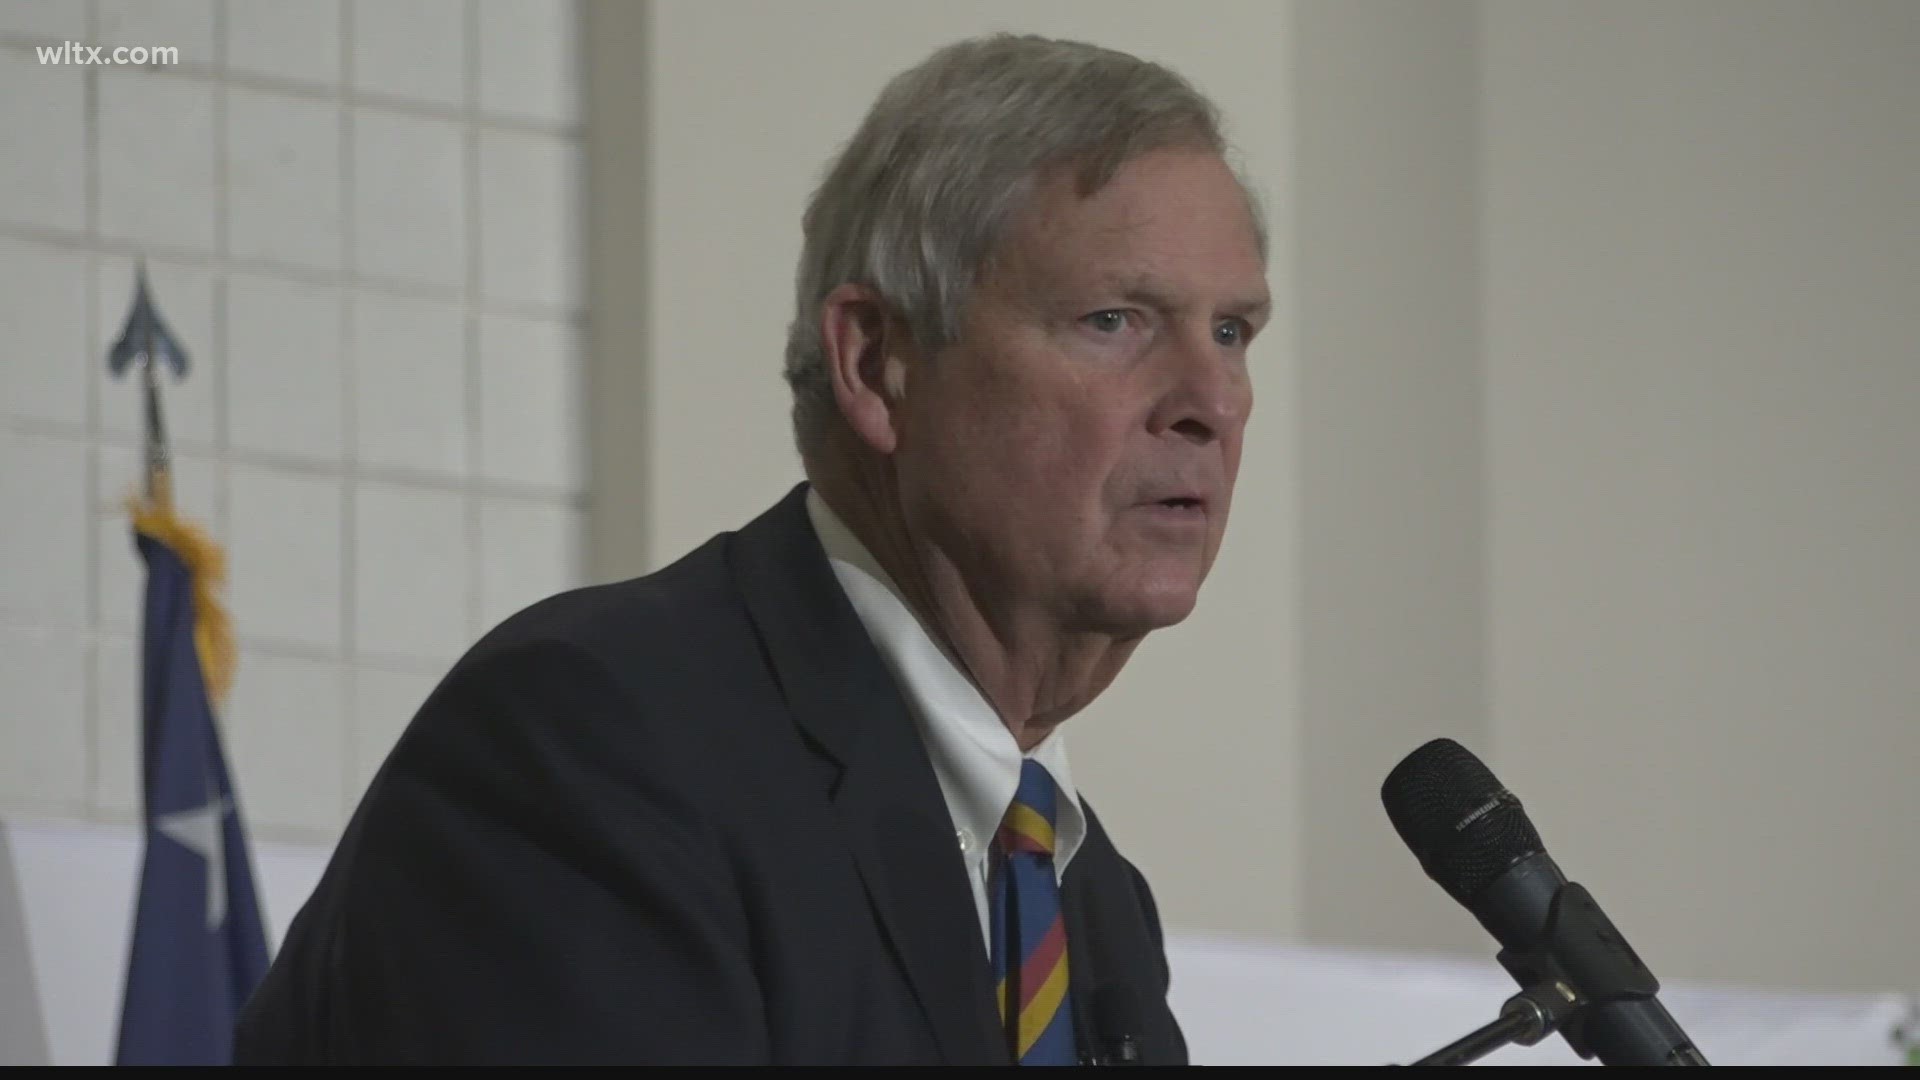 Sec. of Agriculture Thomas Vilsack visited SC State to discuss a $33M investment in the state.